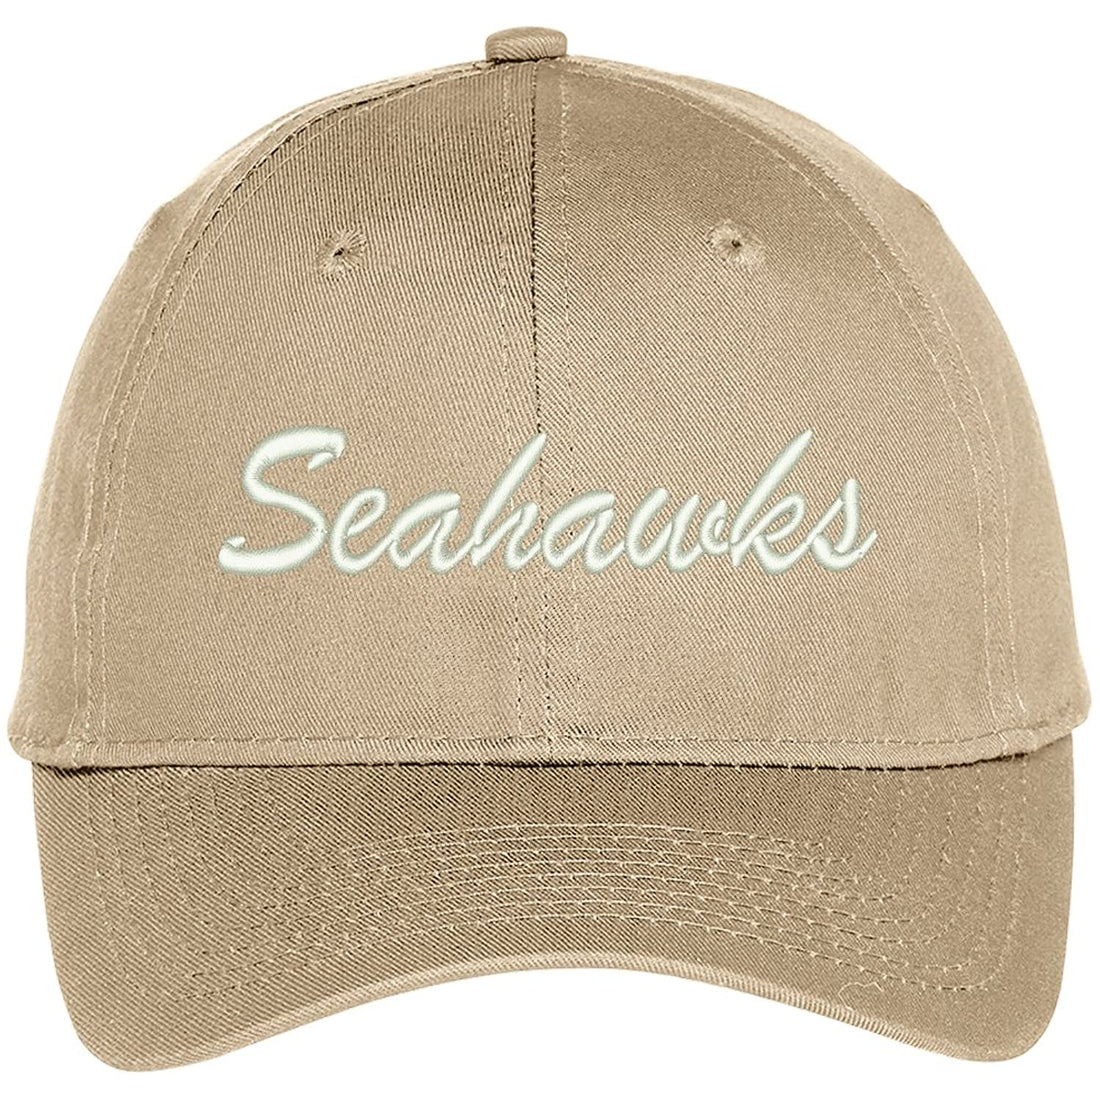 Trendy Apparel Shop Seahawks Embroidered Precurved Adjustable Cap - Navy